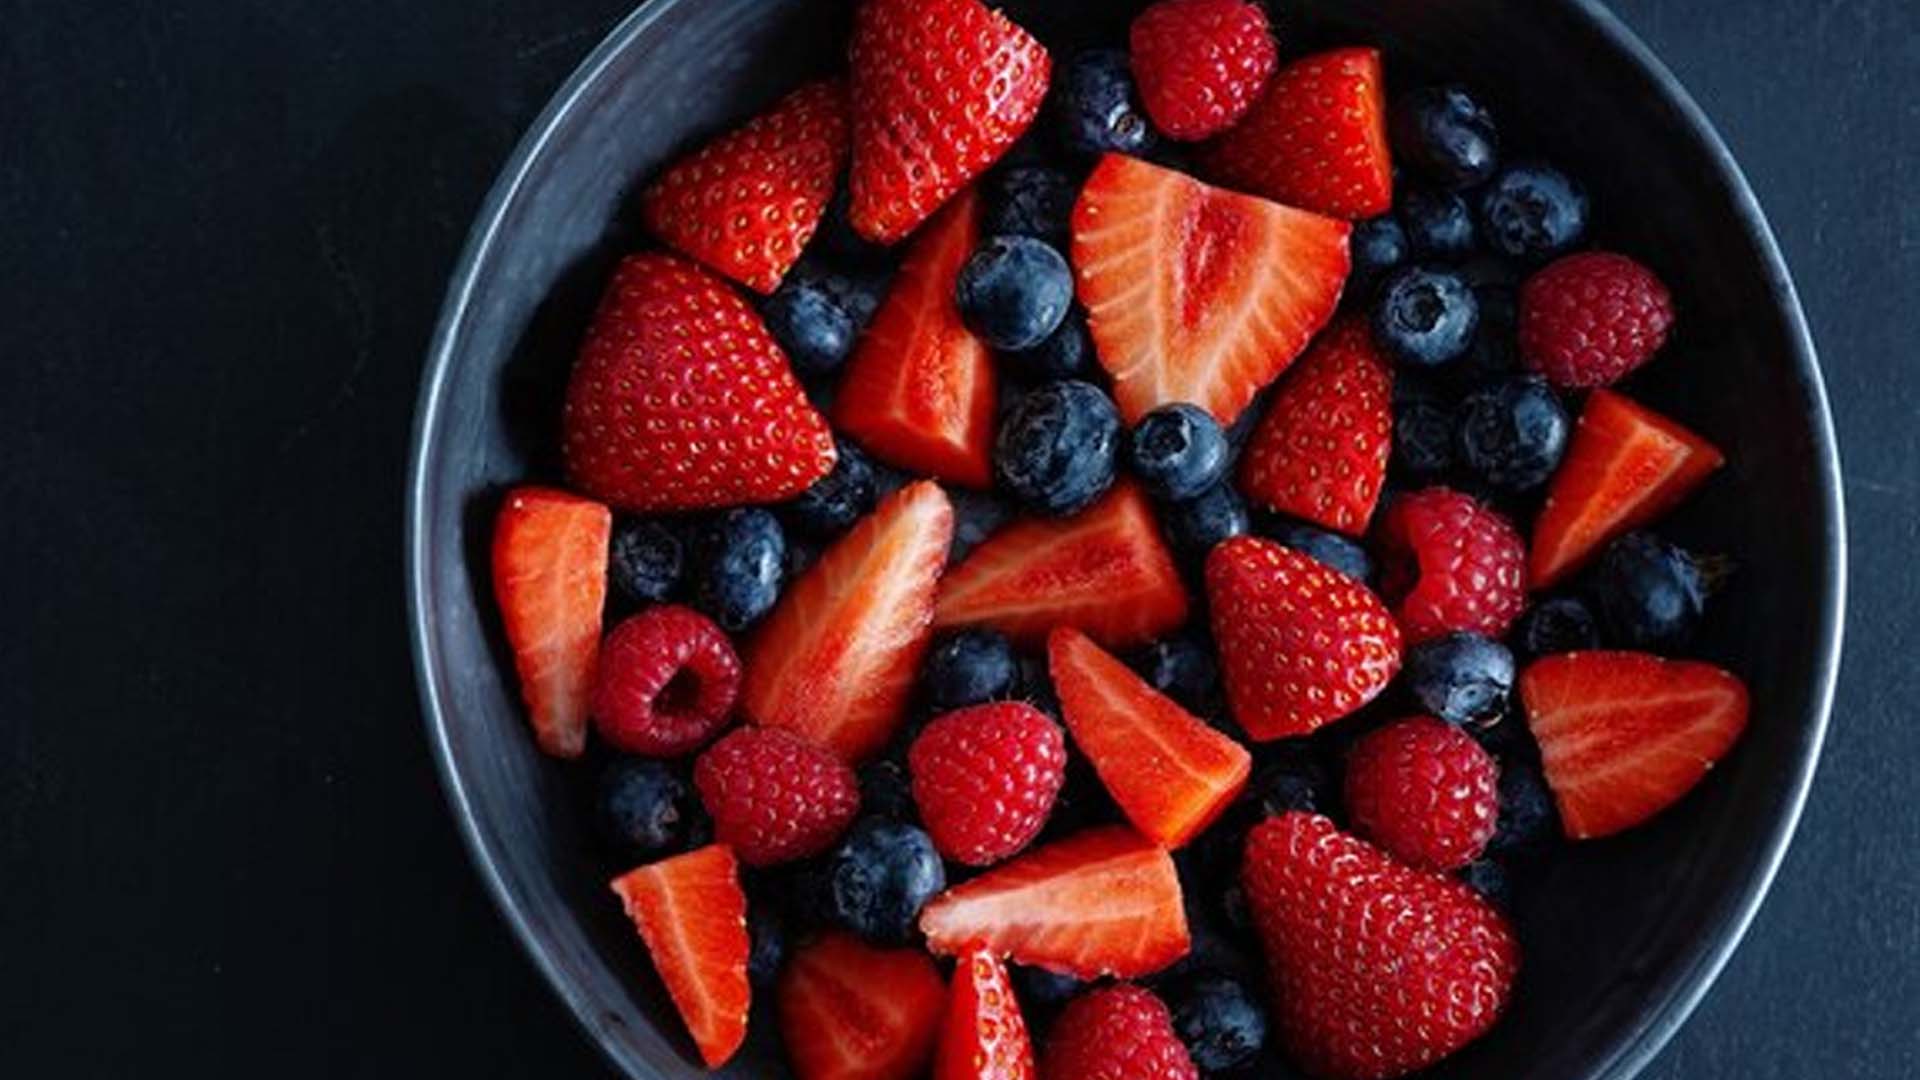 Reasons Why Berries are Healthiest Foods on Earth